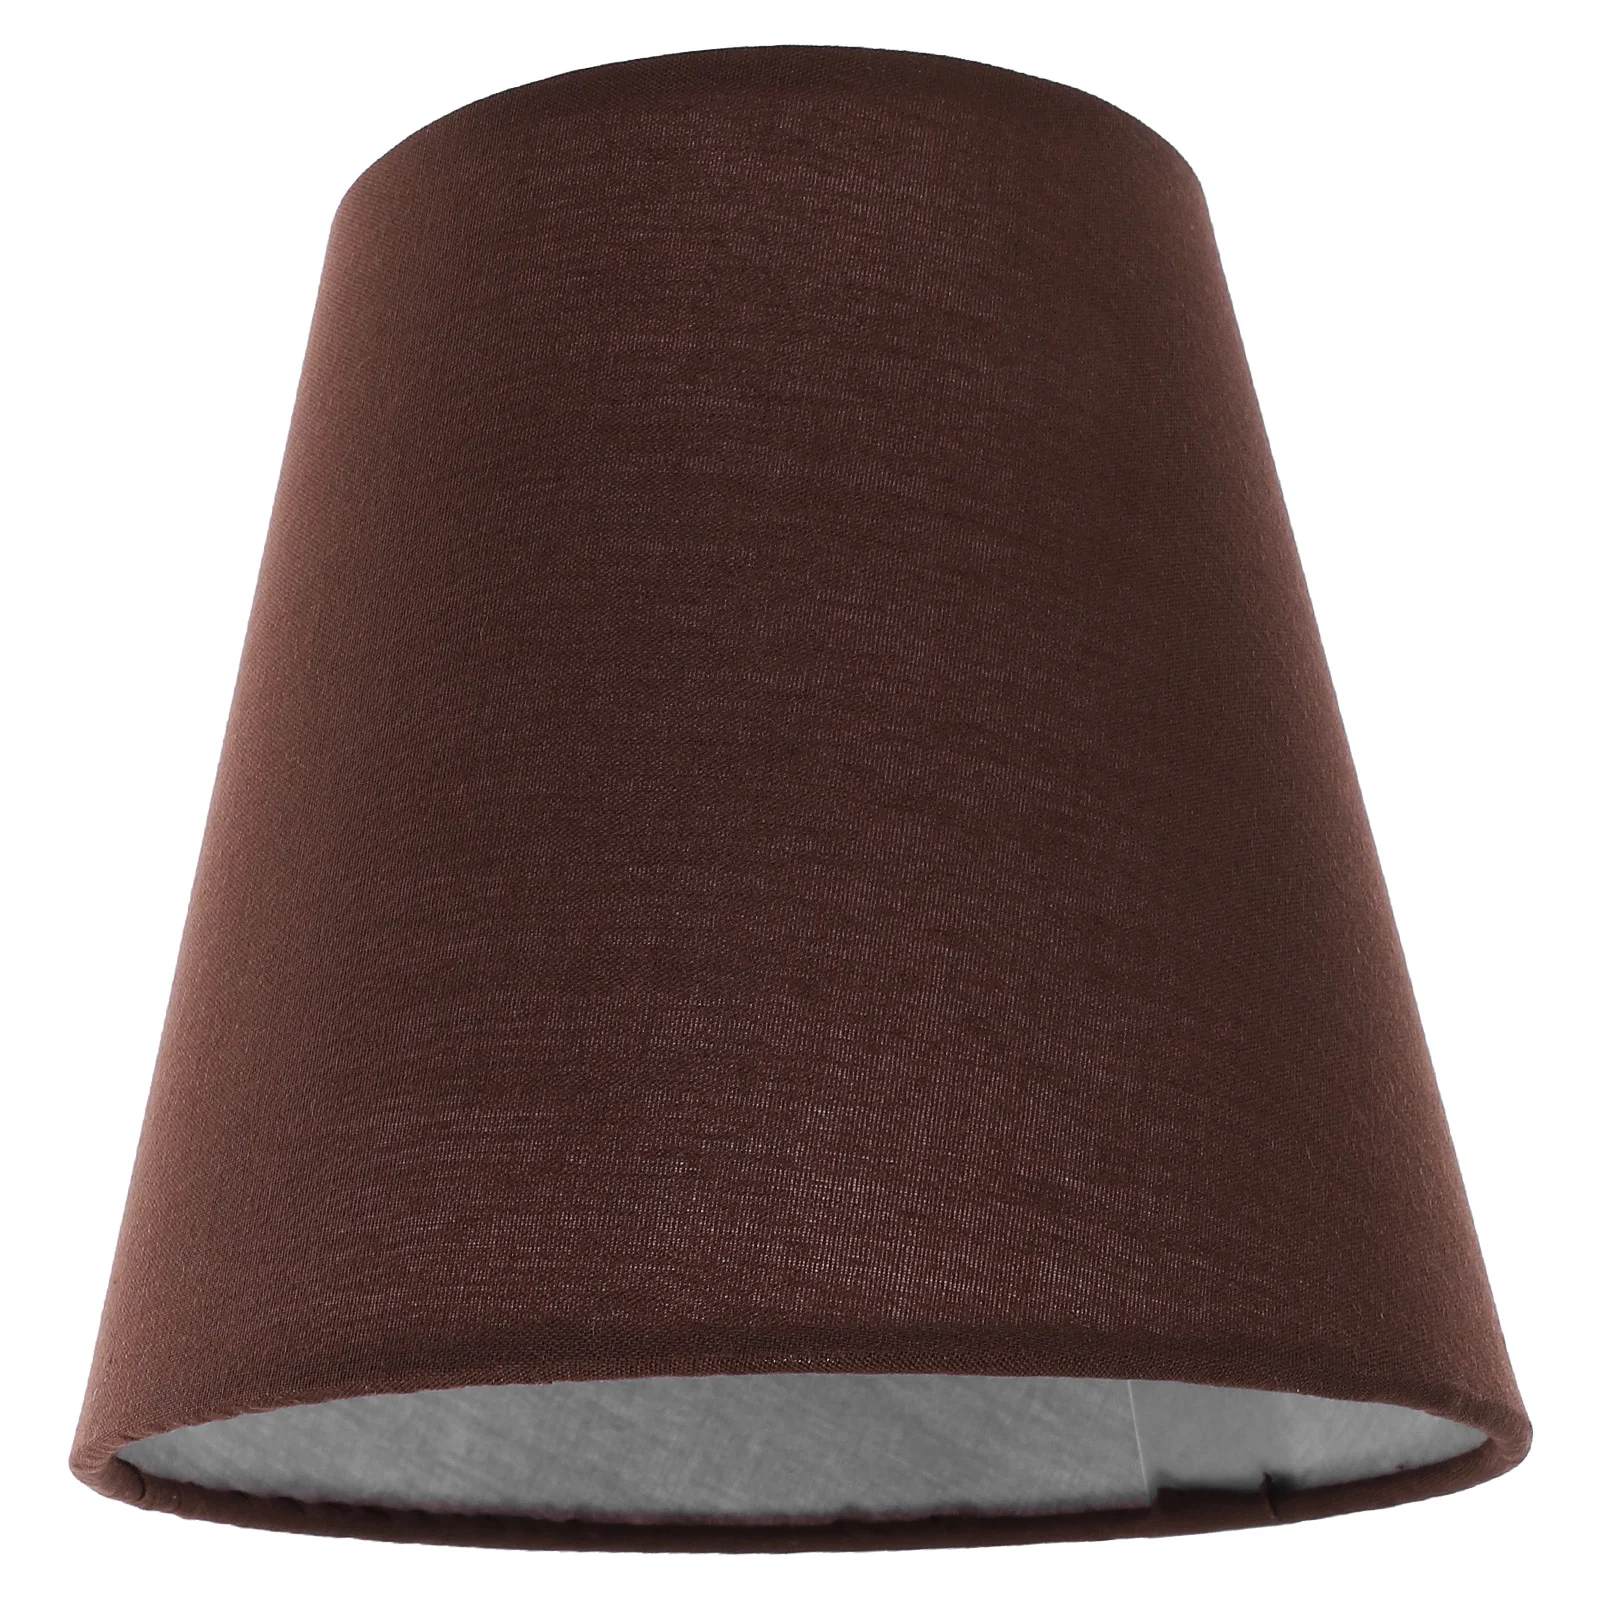 

Replaceable Table Lamp Shade Cover Cloth Home Lampshade Small Shades Sturdy Light Covers Replacement Universal Lights